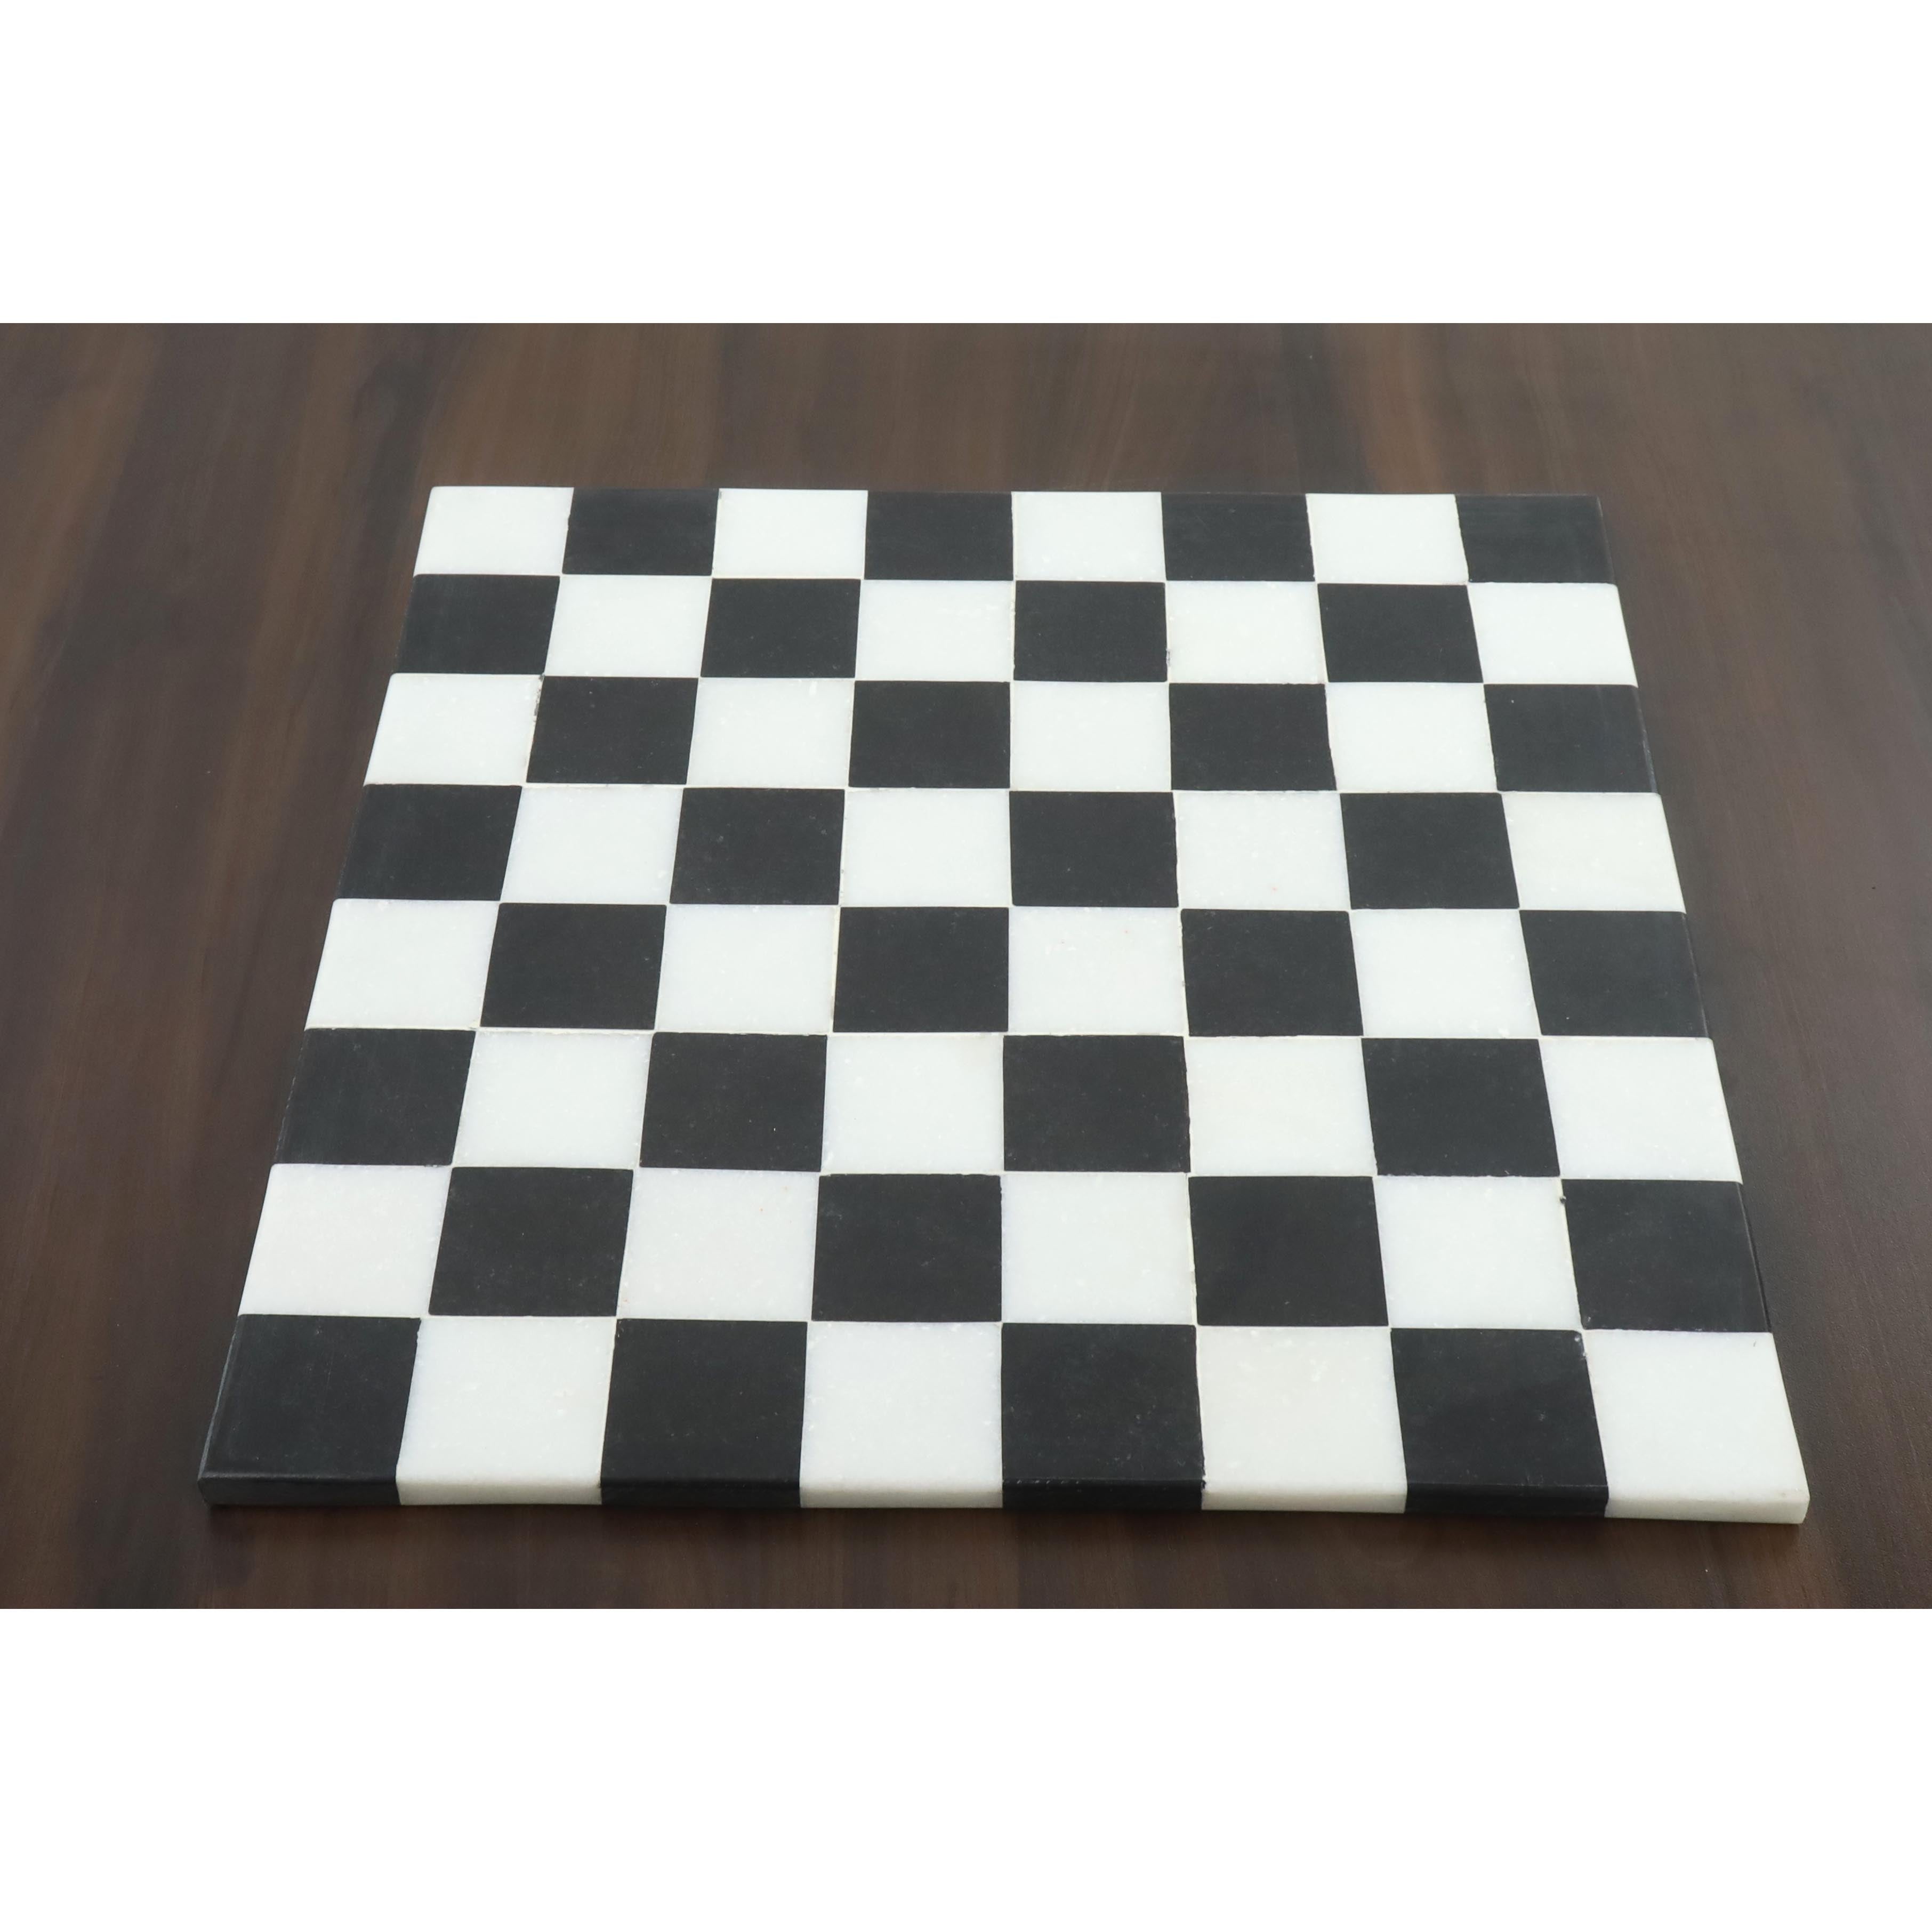 15'' Borderless Marble Stone Luxury Chess Board -  Solid Black and White stone